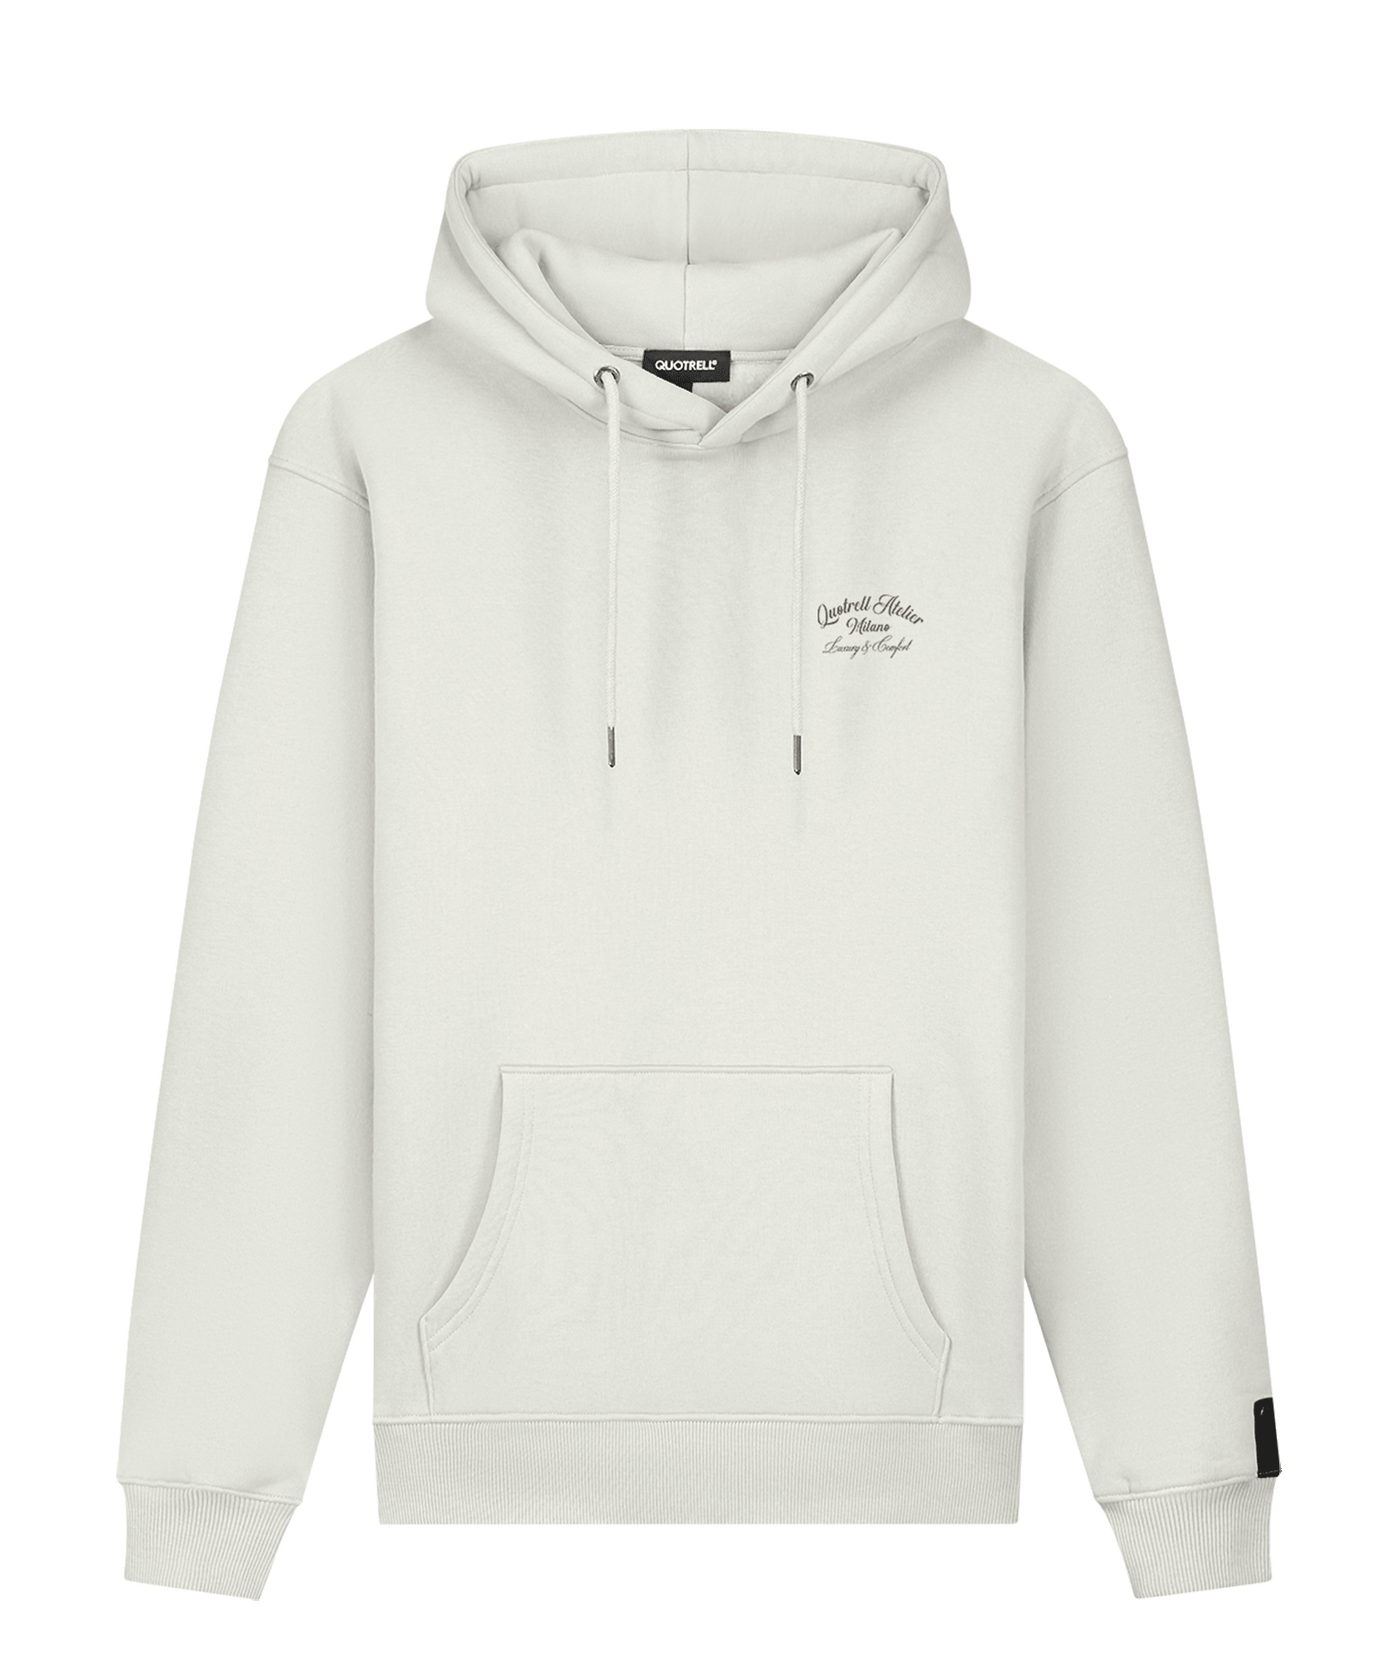 Quotrell - Atelier Milano - Hoodie - Off White/brown